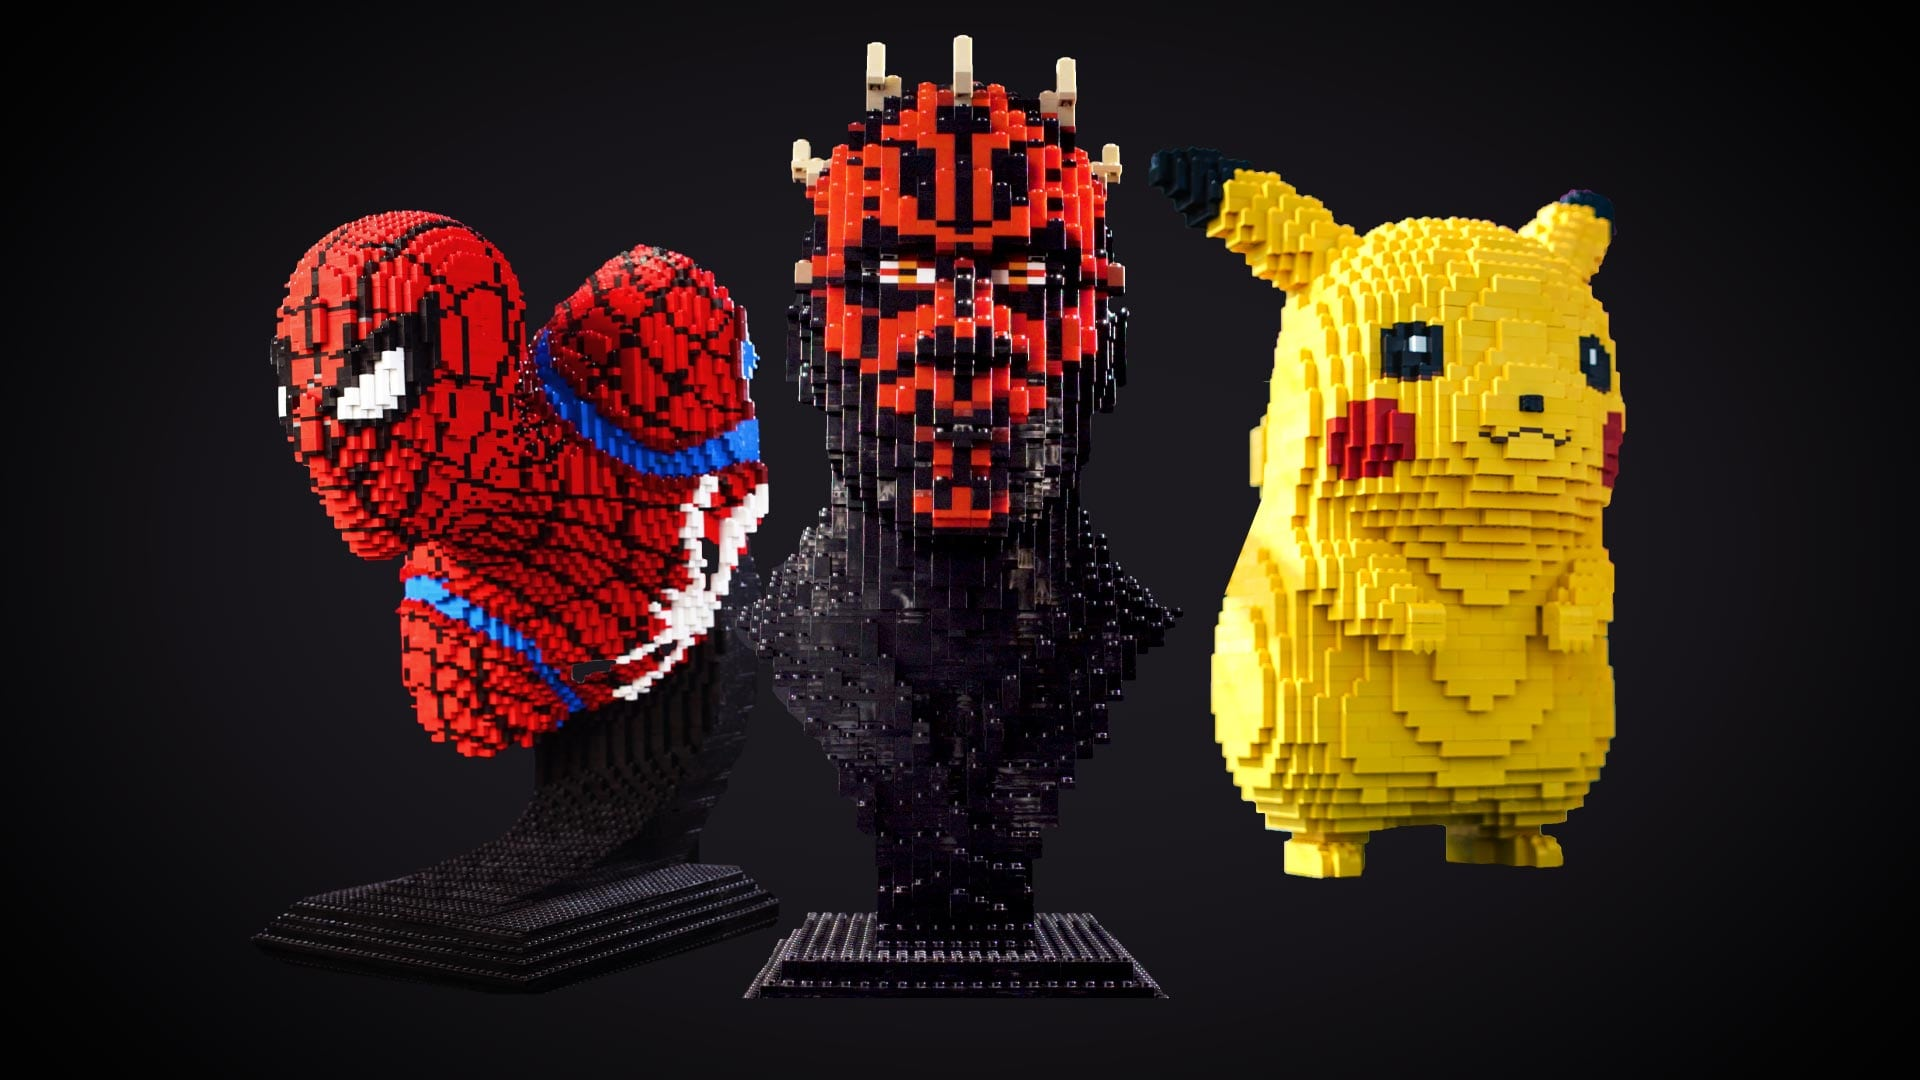 spider web slinger dark lord maul and electric mouse sculptures built with lego bricks